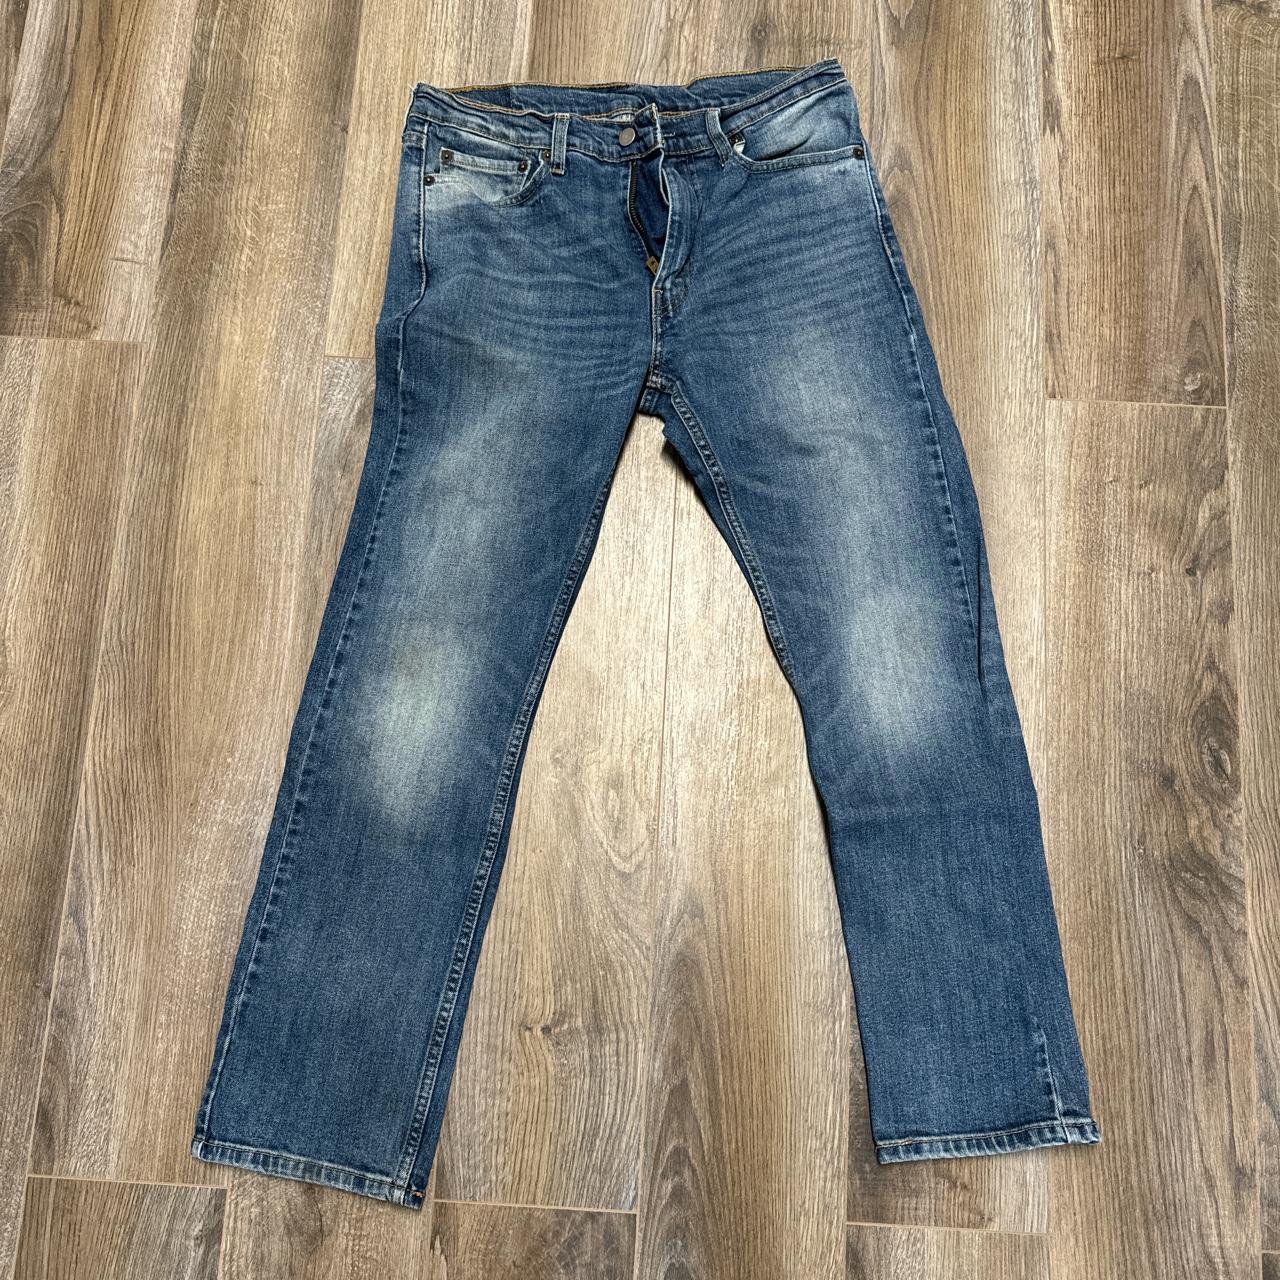 Levi’s 513 jeans nice fade size 31x30 no rips or... - Depop